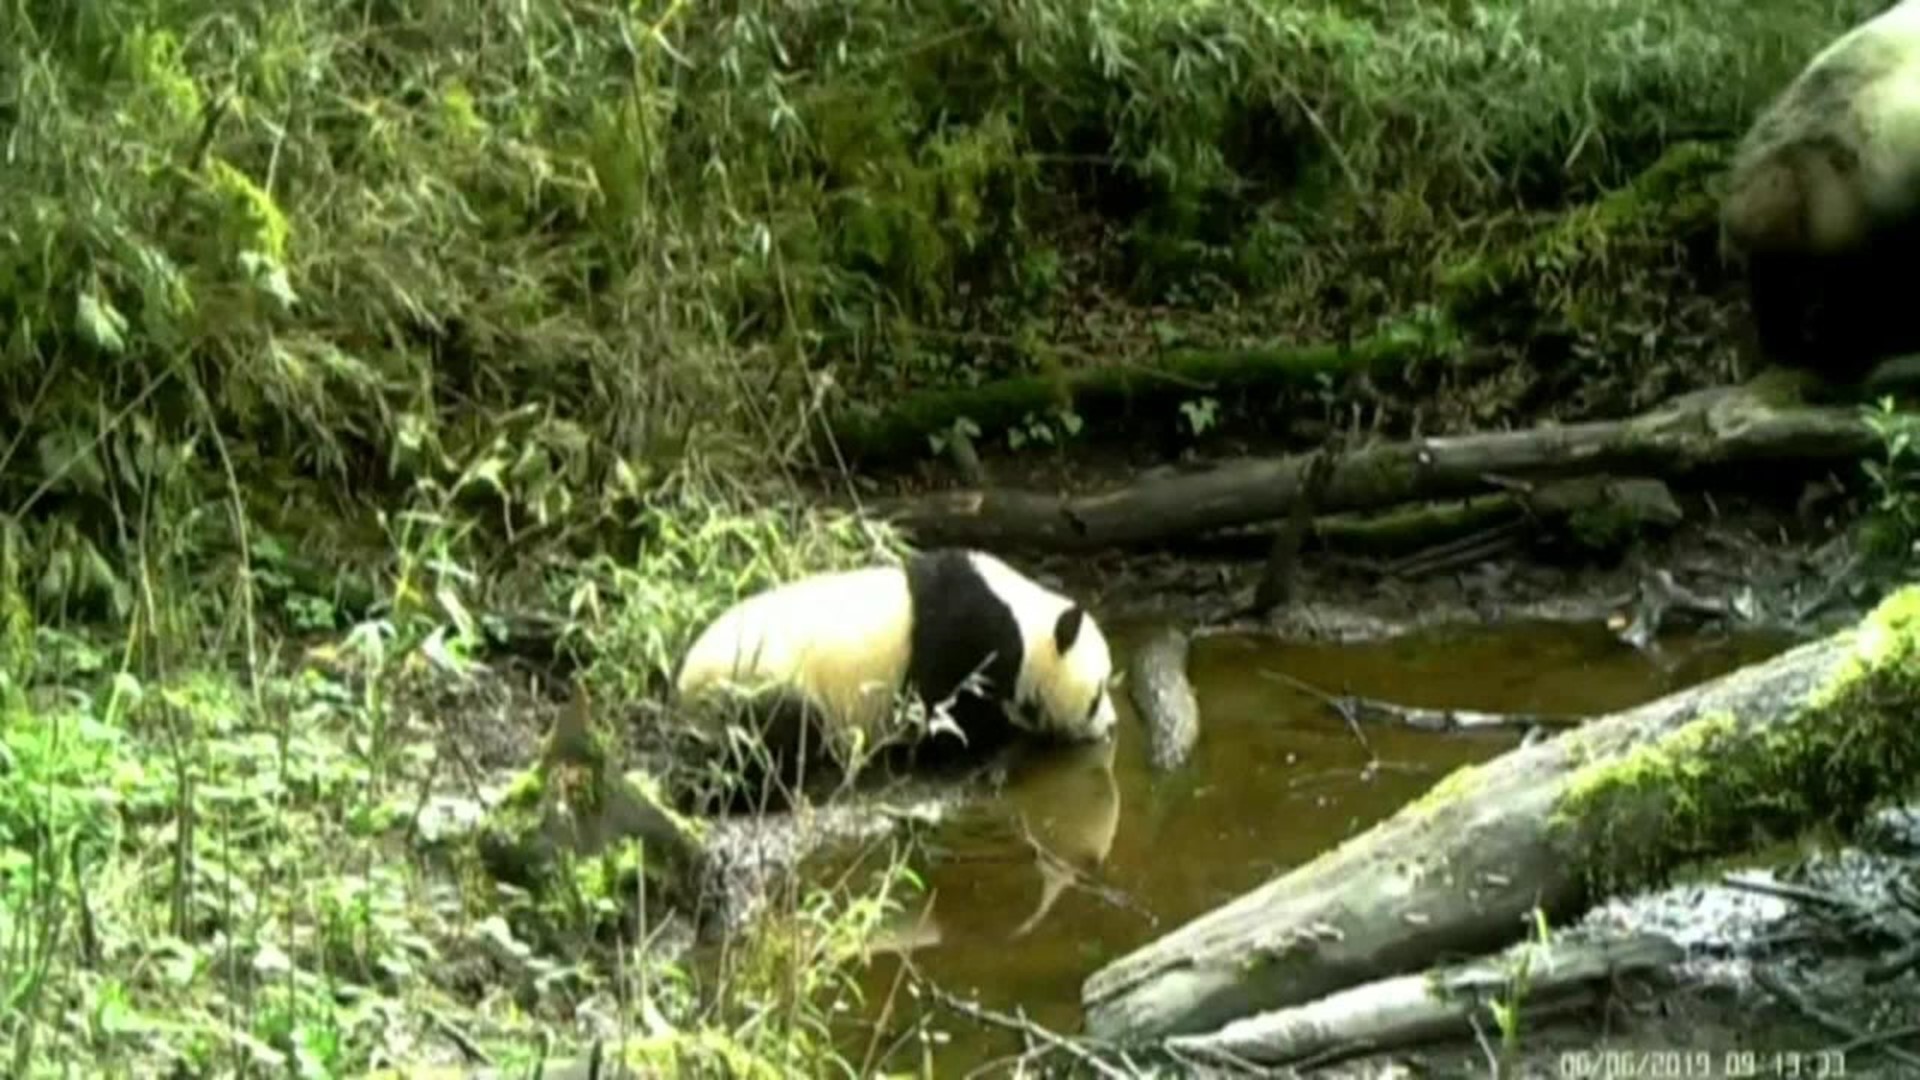 Rare footage shows female panda with her cub in the wild